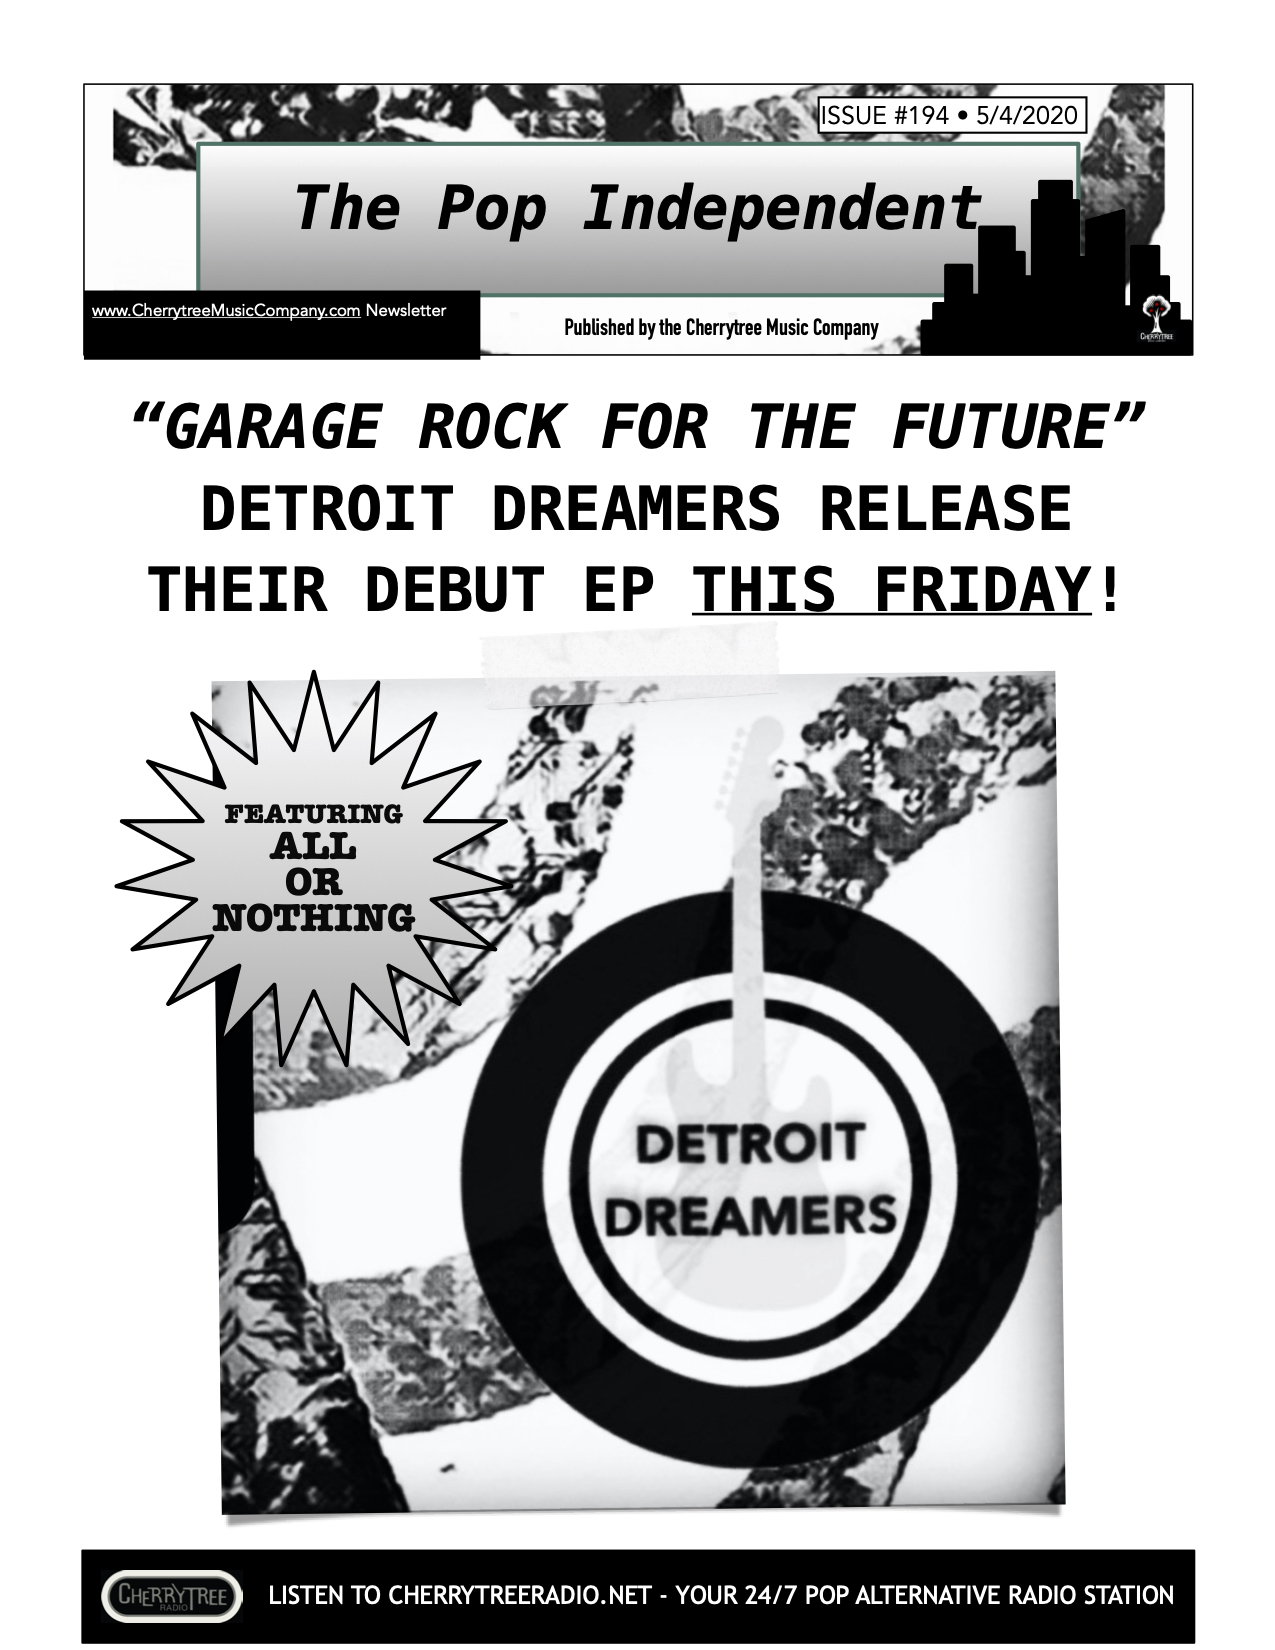 The Pop Independent, issue 194